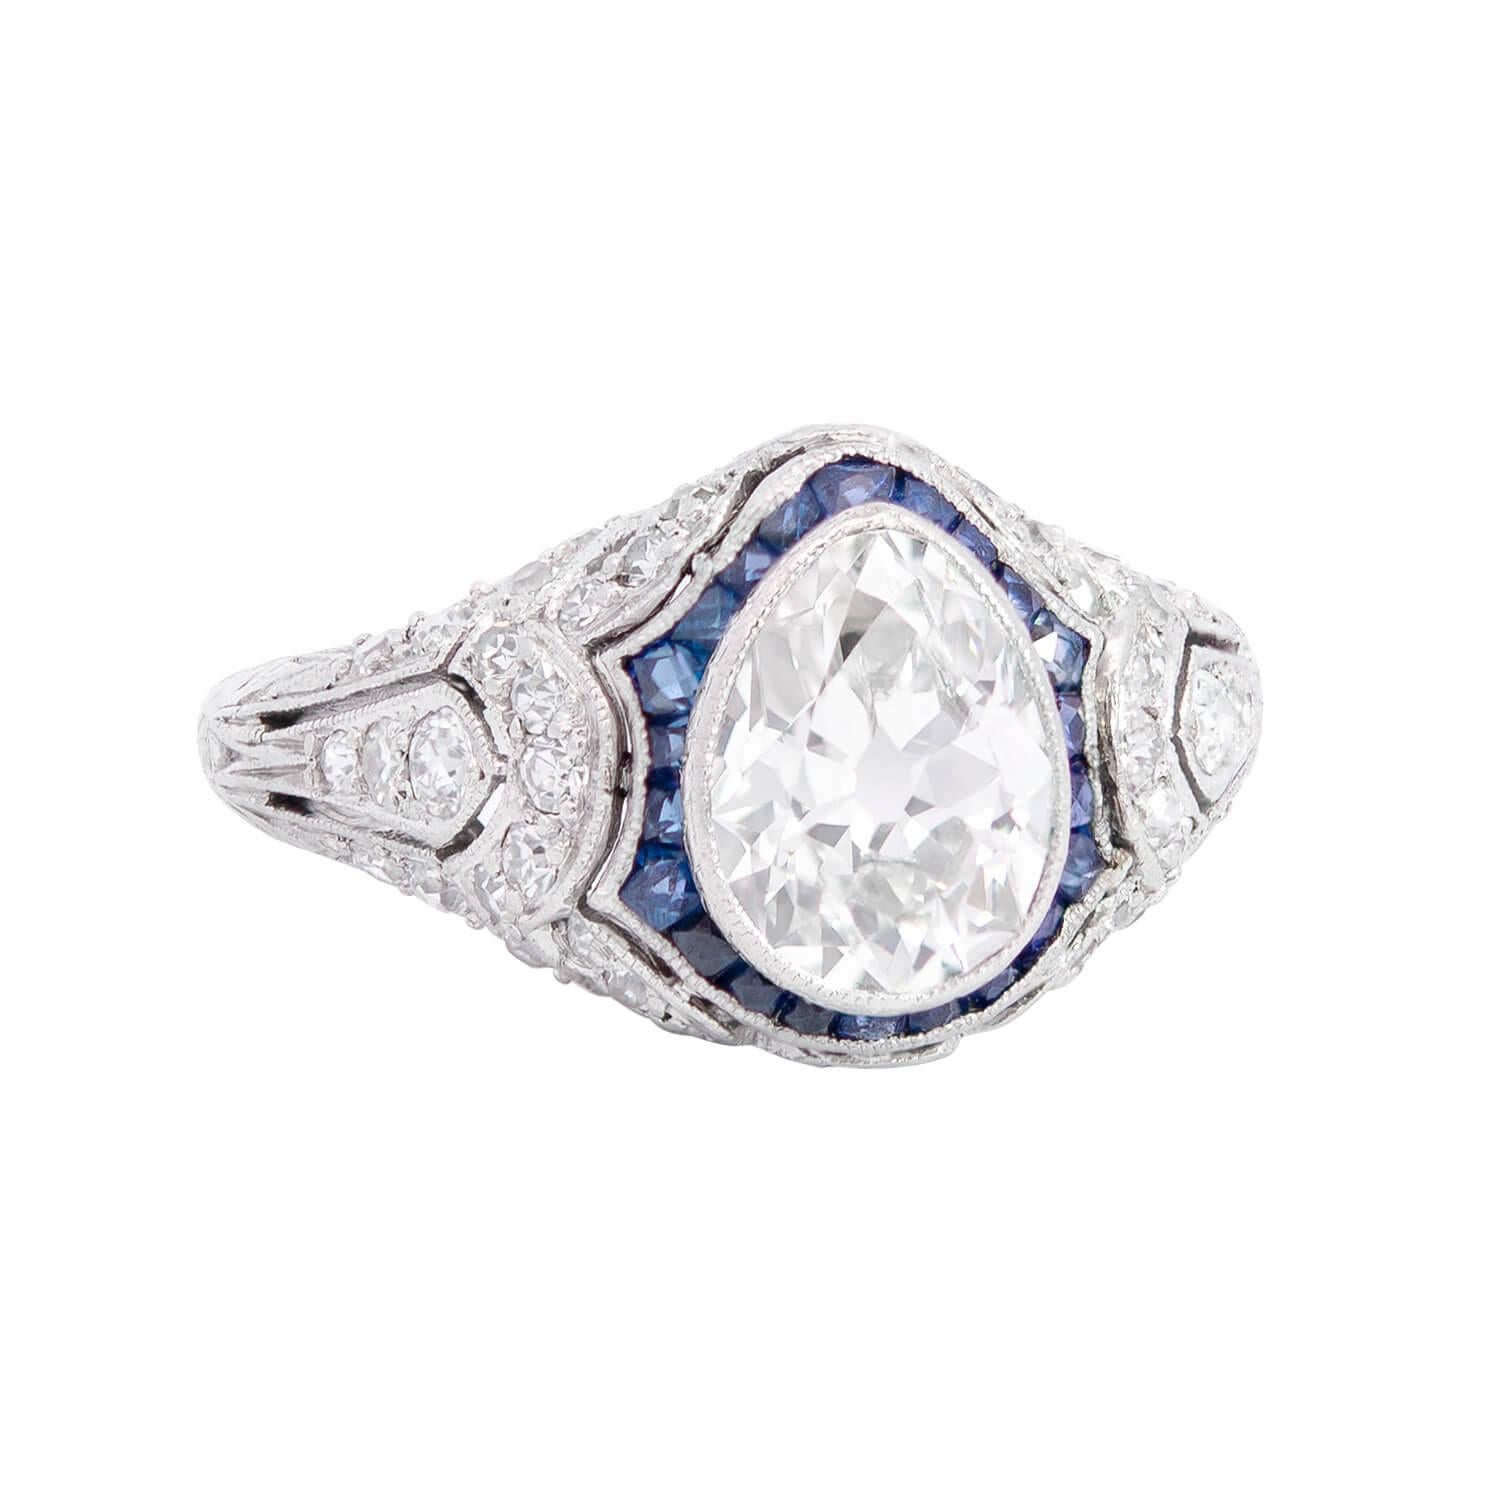 A gorgeous diamond and sapphire engagement ring from the Edwardian (ca1910) era! 

Crafted in platinum, this stunning piece holds a beautiful old Mine Cut diamond at its center, encircled by a row of fabulous rich blue calibrated sapphires. 

The